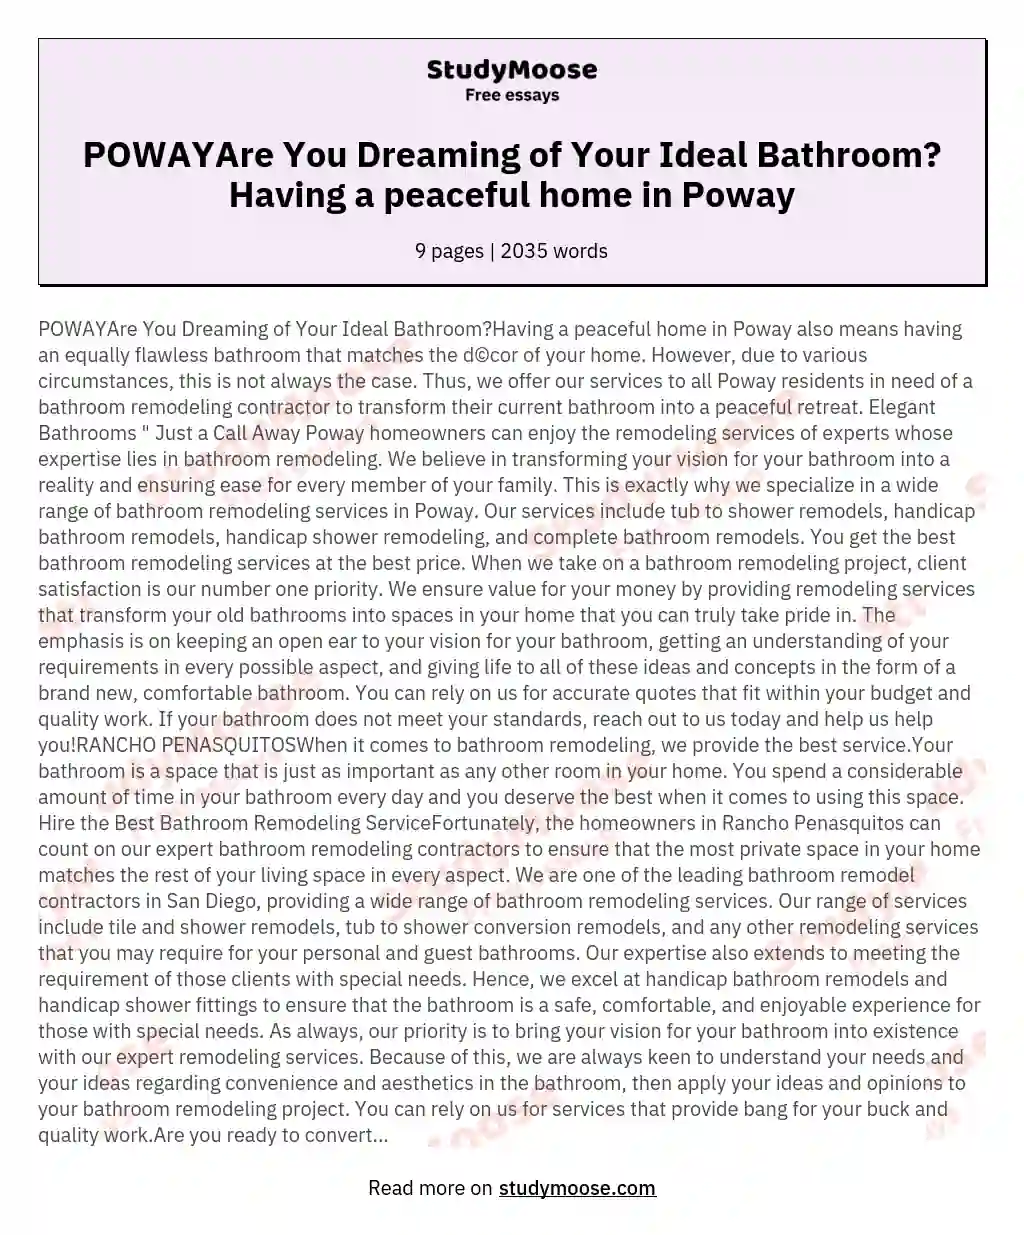 POWAYAre You Dreaming of Your Ideal Bathroom?Having a peaceful home in Poway